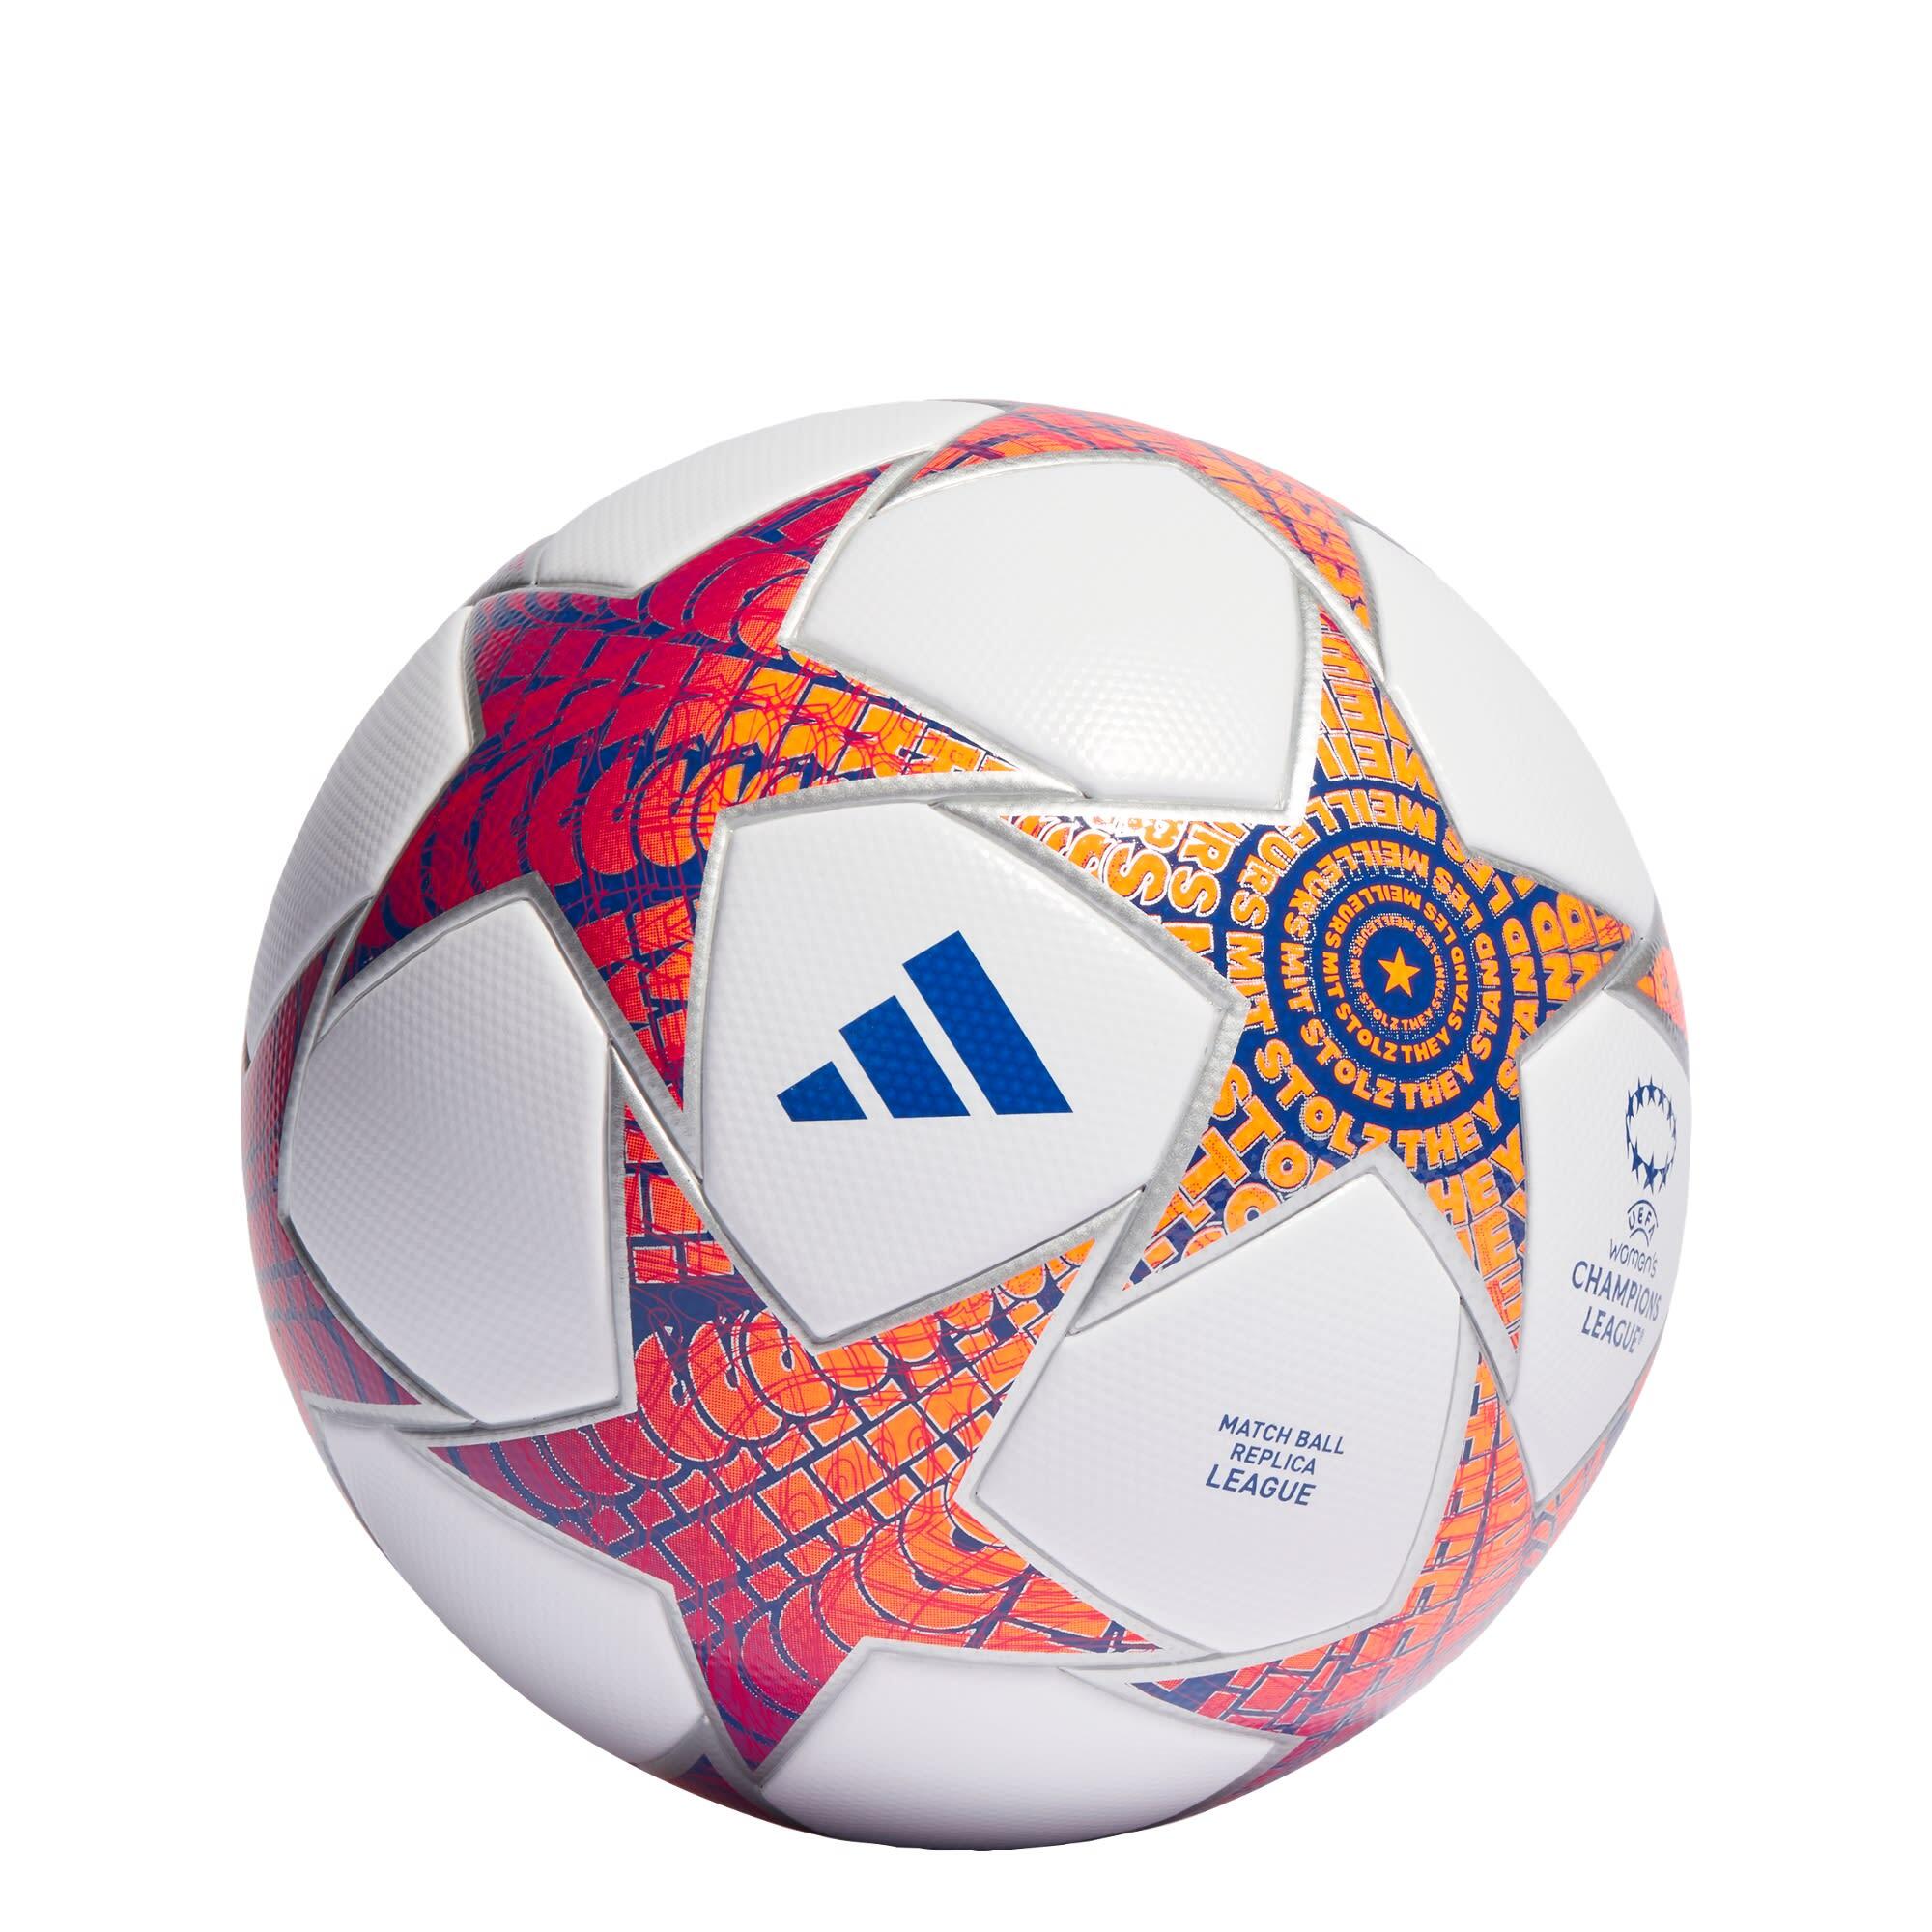 ADIDAS UWCL League 23/24 Group Stage Ball